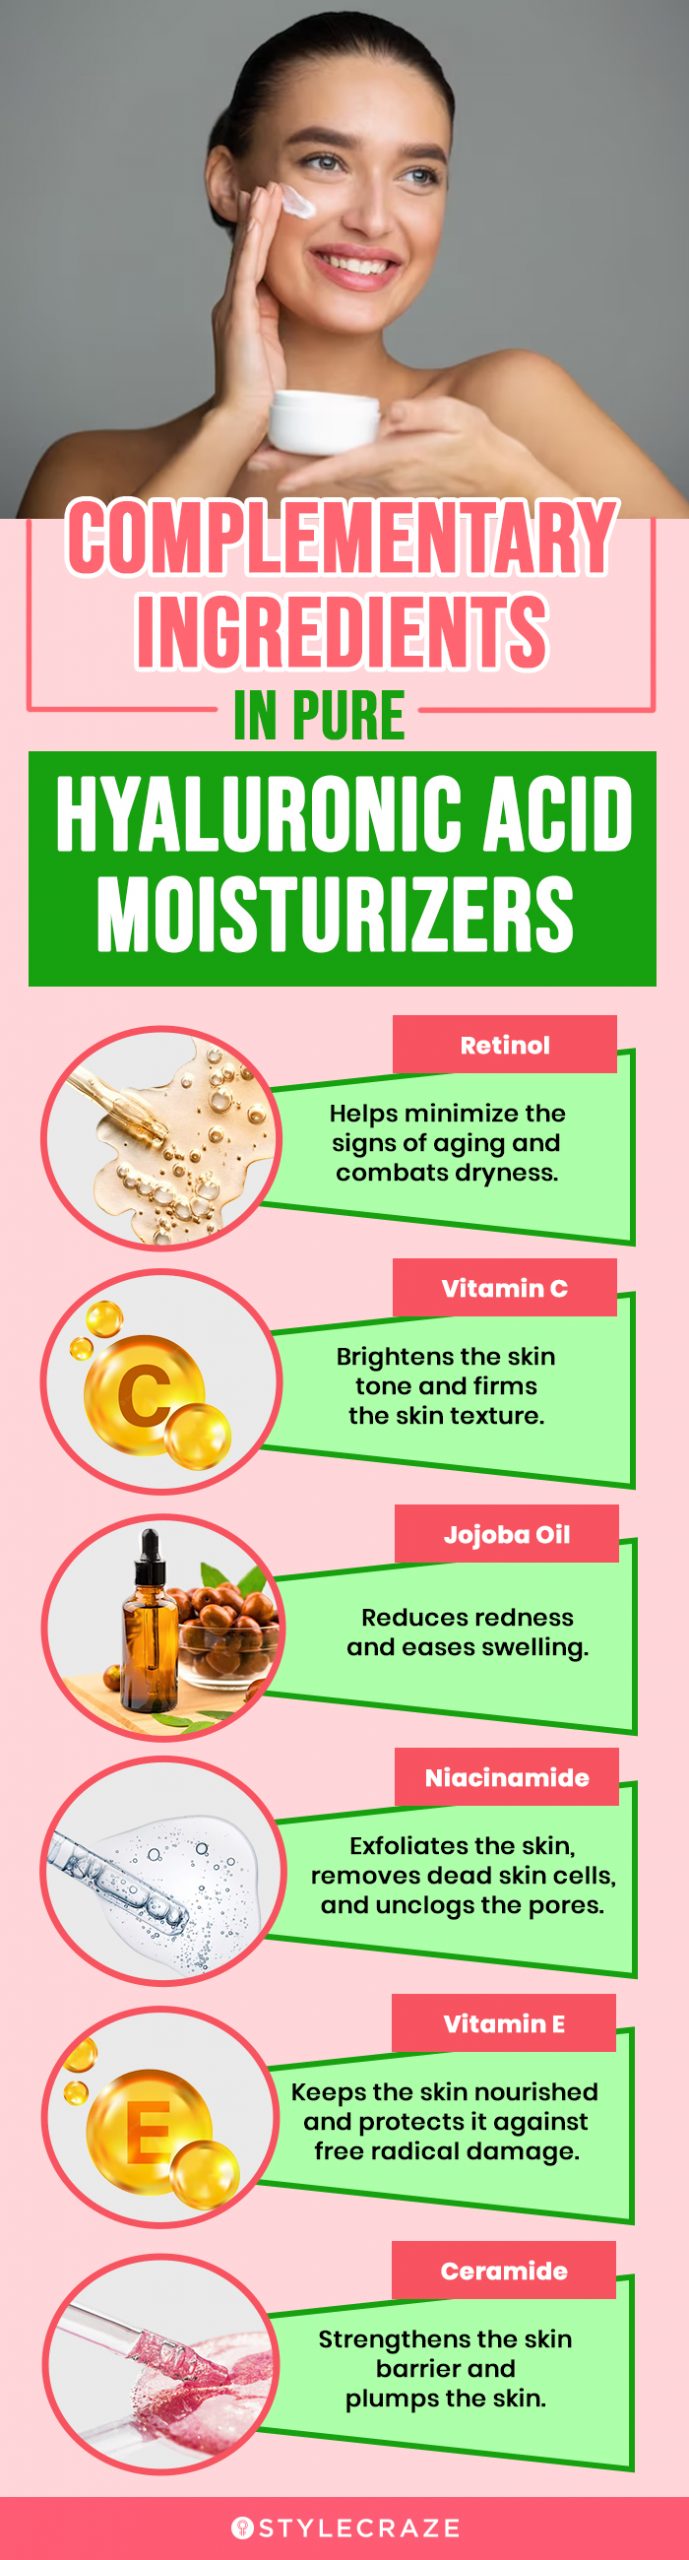 Complementary Ingredients In Pure Hyaluronic Acid Moisturizers (infographic)